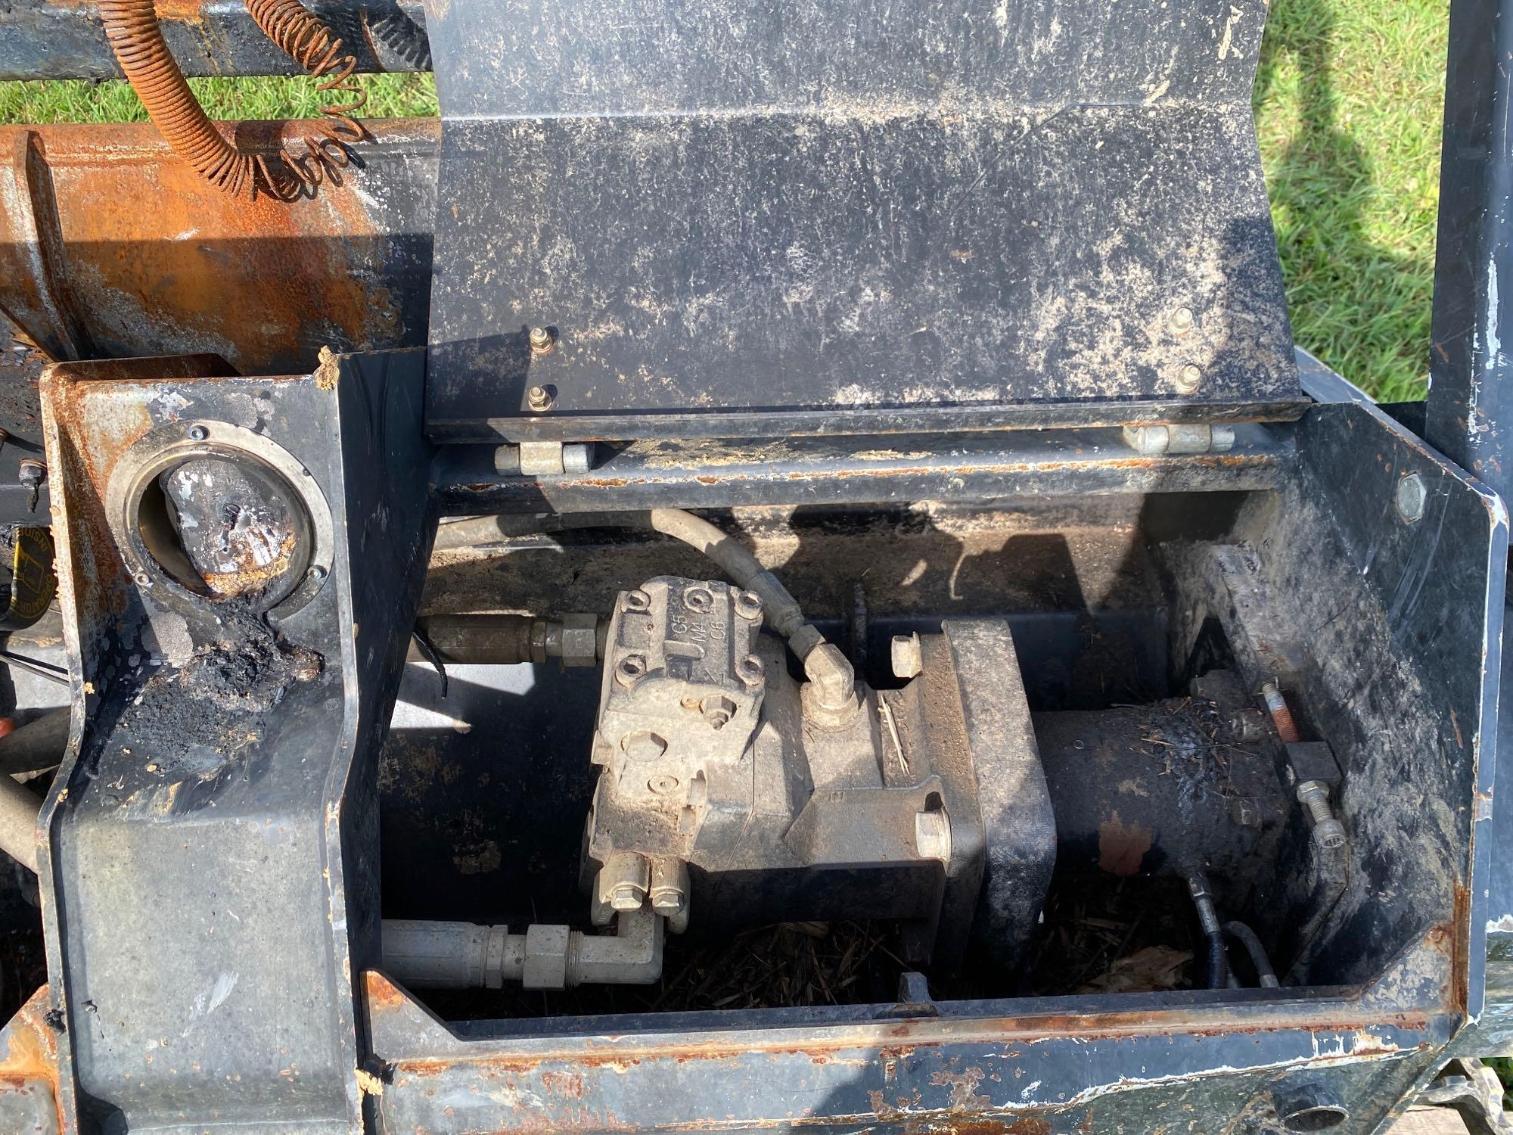 Image for Caterpillar Mulching Head, came off a machine that was in a fire, needs parts per seller